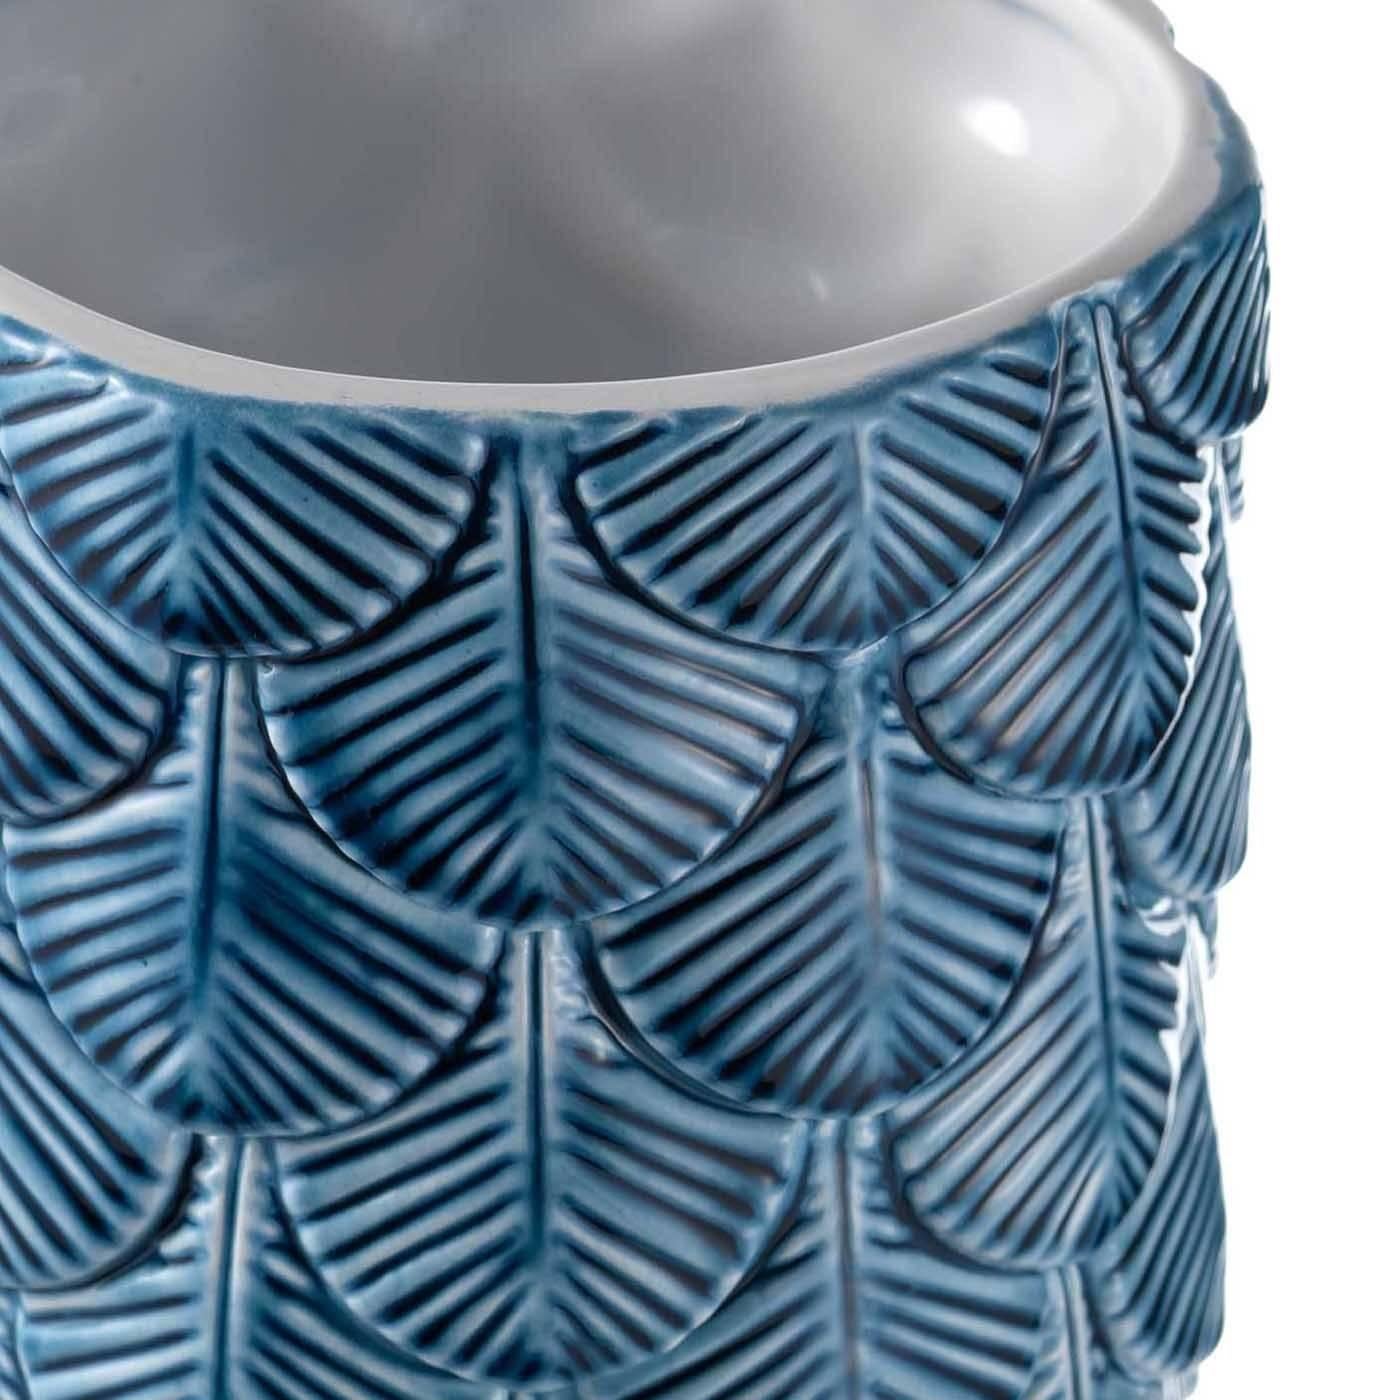 In this striking vase, the rows of exquisite ceramic feathers that run all around its cylinder have a blue enamel finish at the top that gradually fades into white. Each feather was decorated by hand by expert artisans for a sophisticated finished